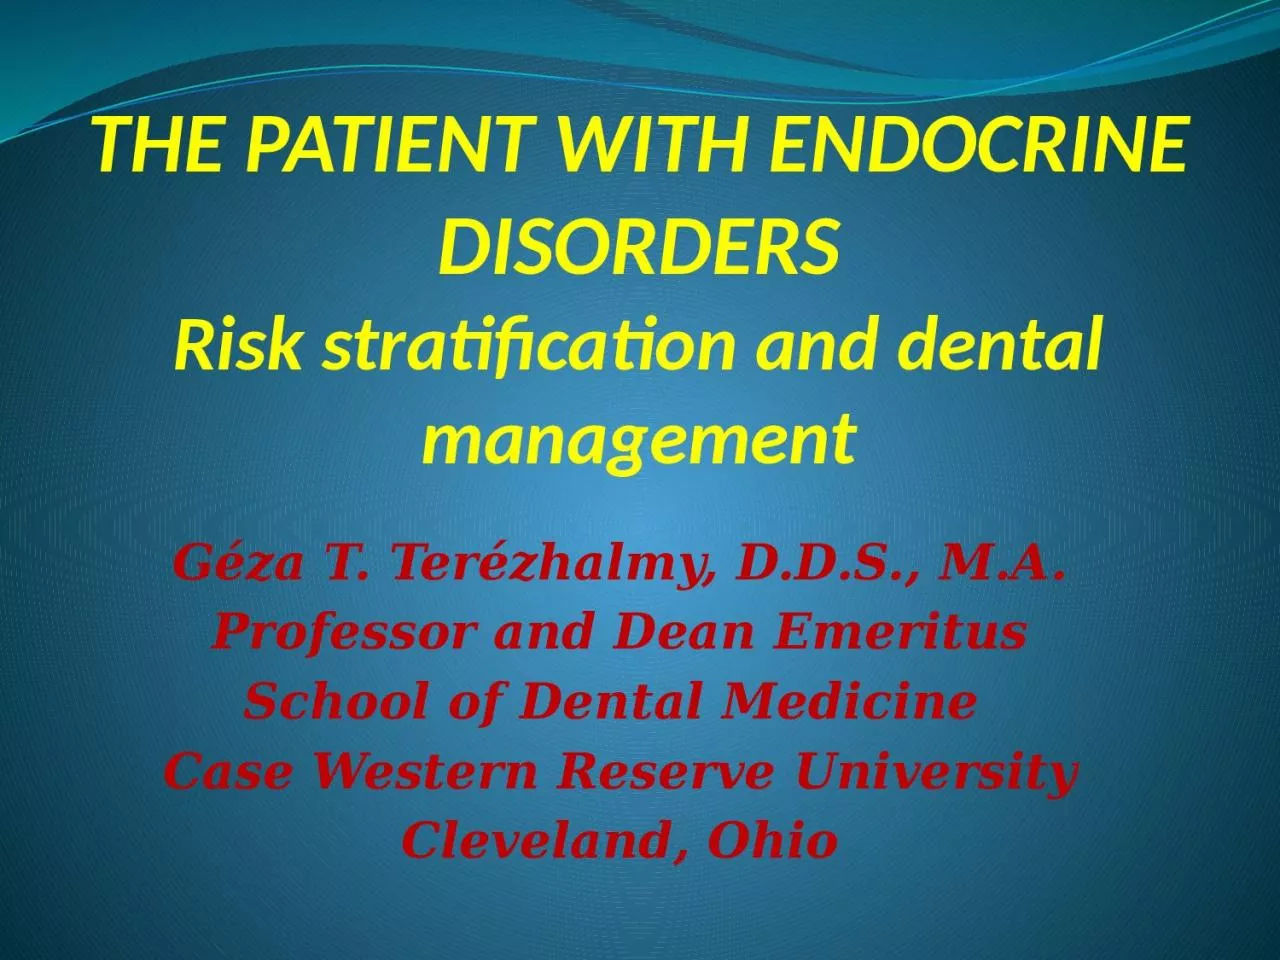 THE PATIENT WITH ENDOCRINE DISORDERS